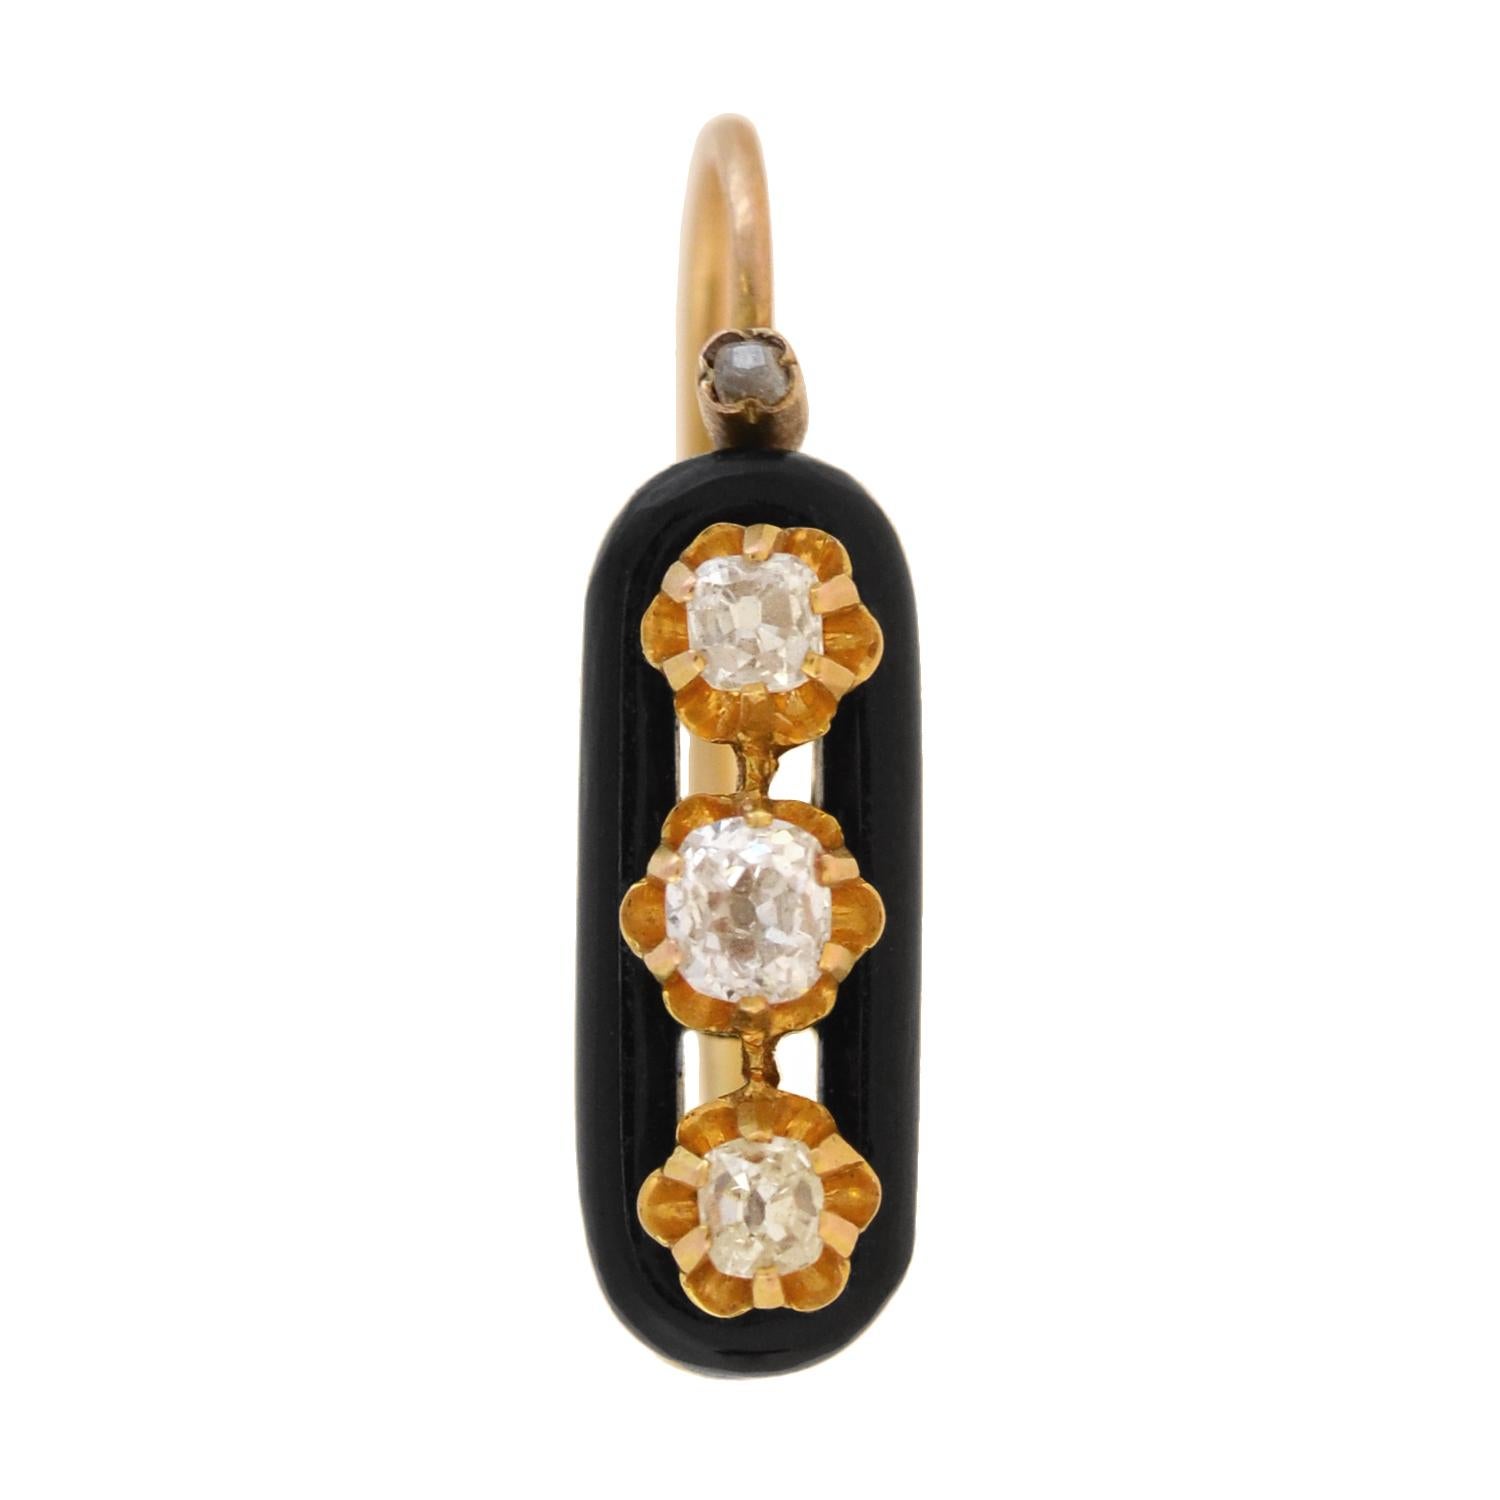 A lovely pair of diamond and onyx earrings from the Victorian (ca1880) era! Crafted in 15kt rosy yellow gold, each earring adorns three sparkling old Mine Cut diamonds that form a simple, yet beautiful design. The stones line the center of an onyx